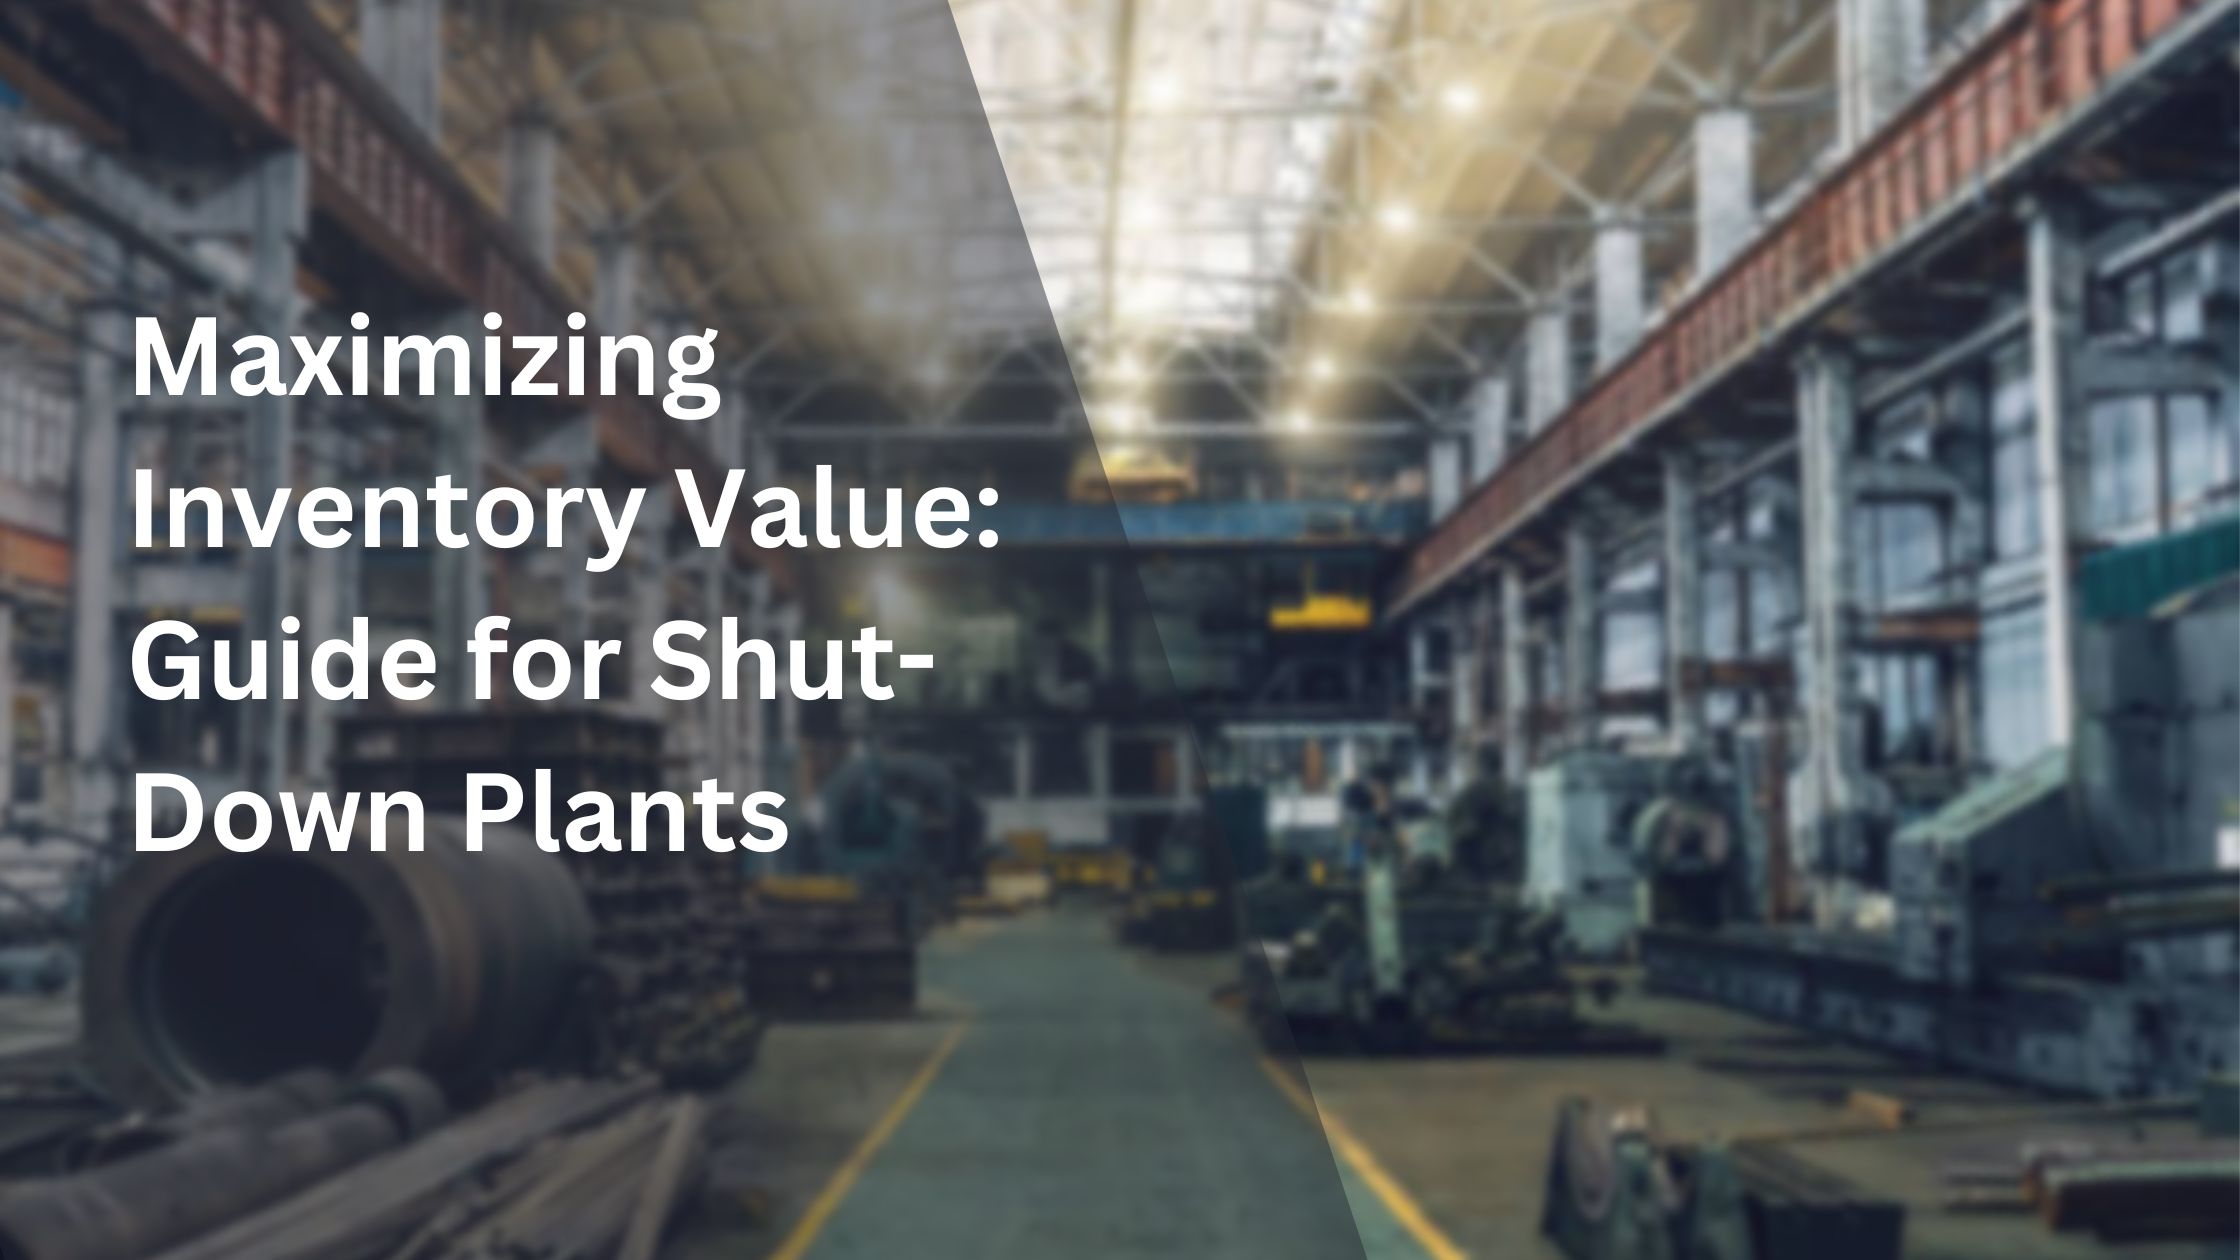 Maximizing Inventory Value: The Guide for Shutdown Plants